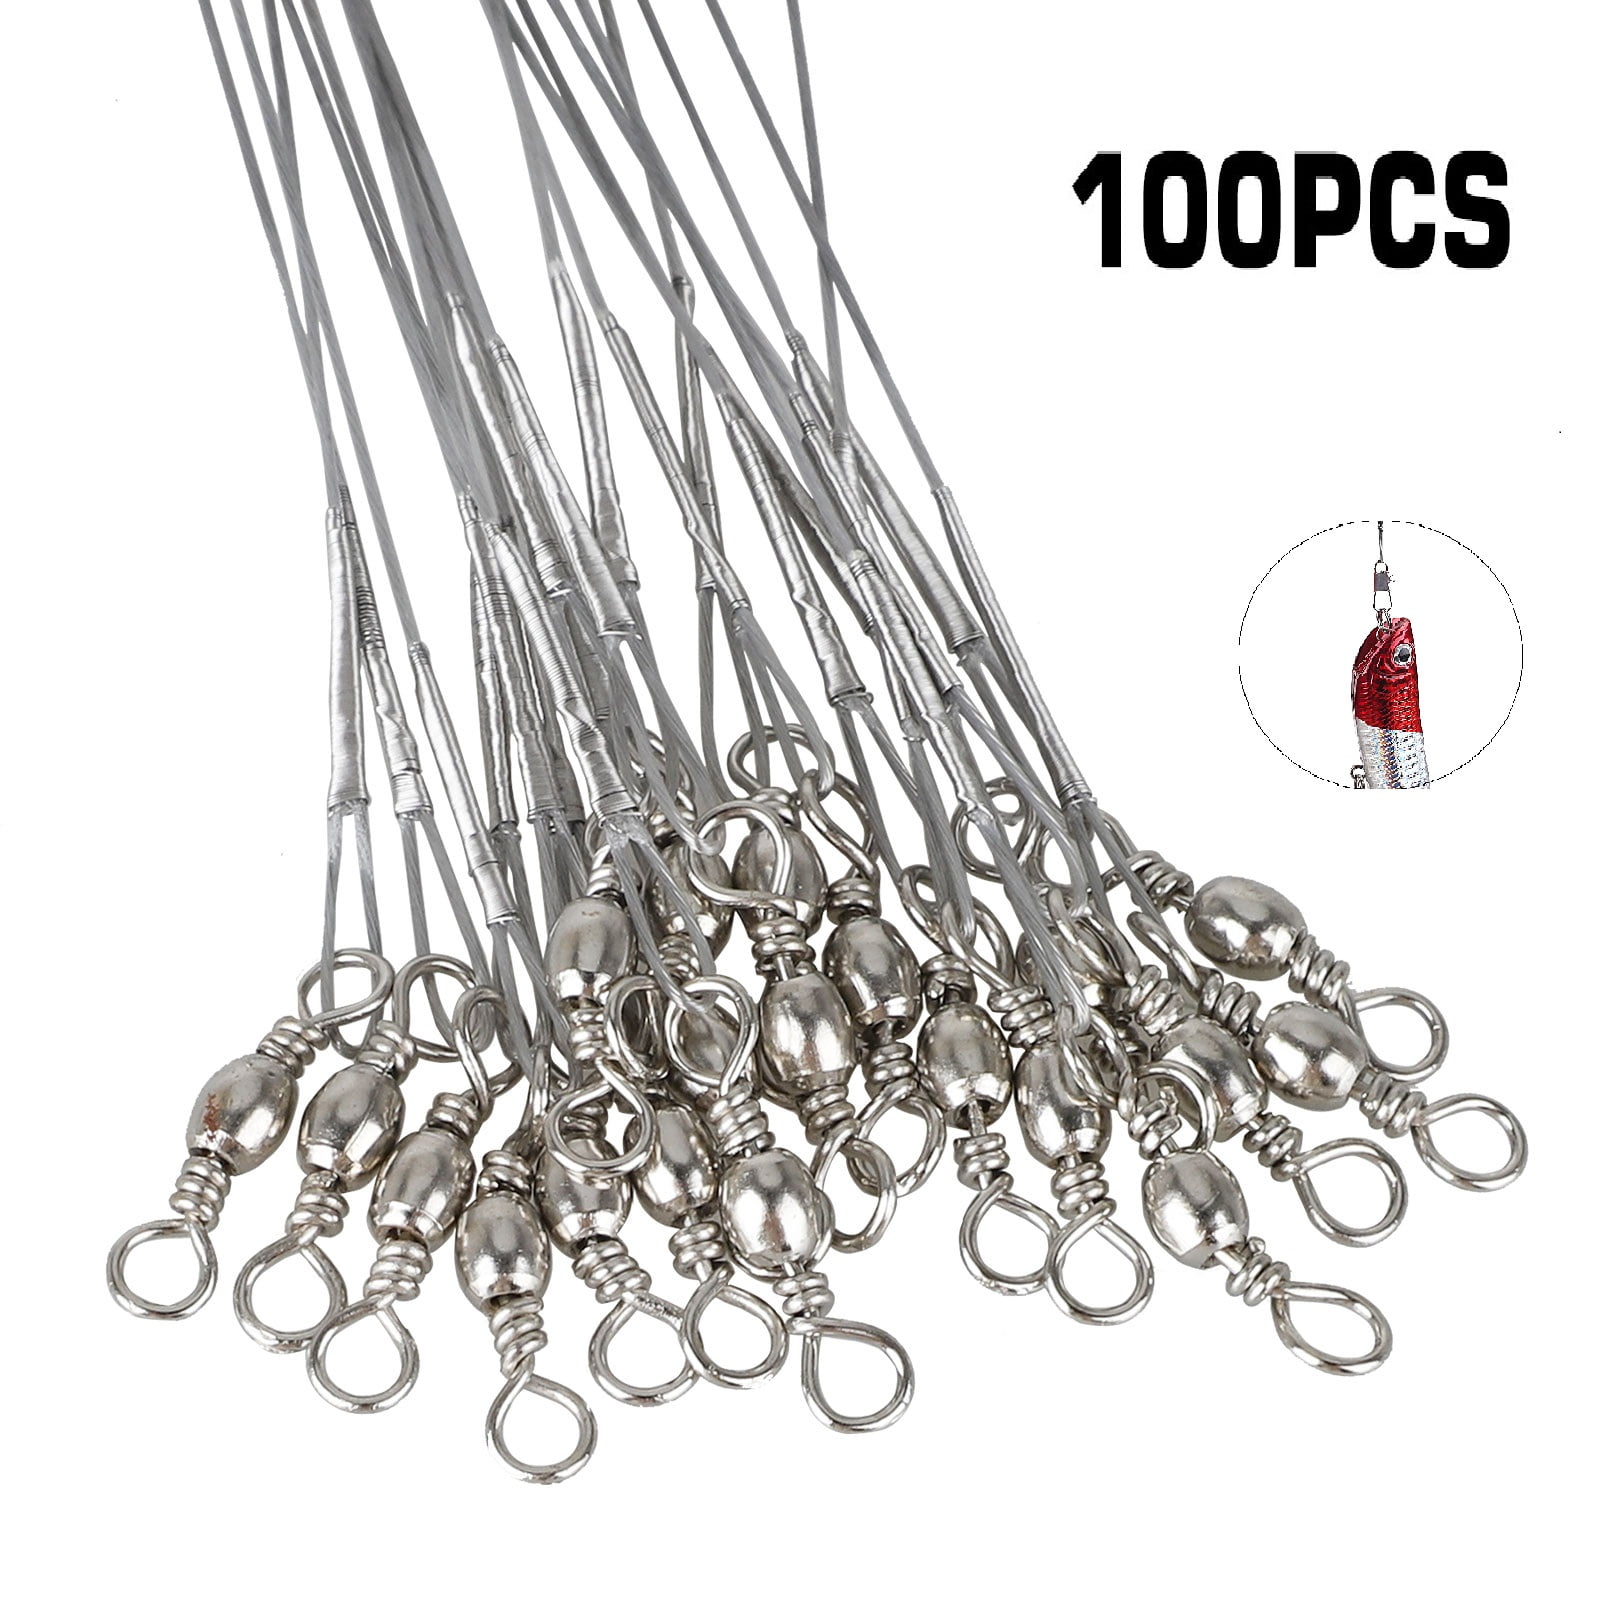 TSV 100PCS Stainless Steel Wire Fishing Leaders High-Strength Fishing Wire  Rigs Fishing Trace Lures Steel Wire Leader Fishing Line Tackle, 160 180 220